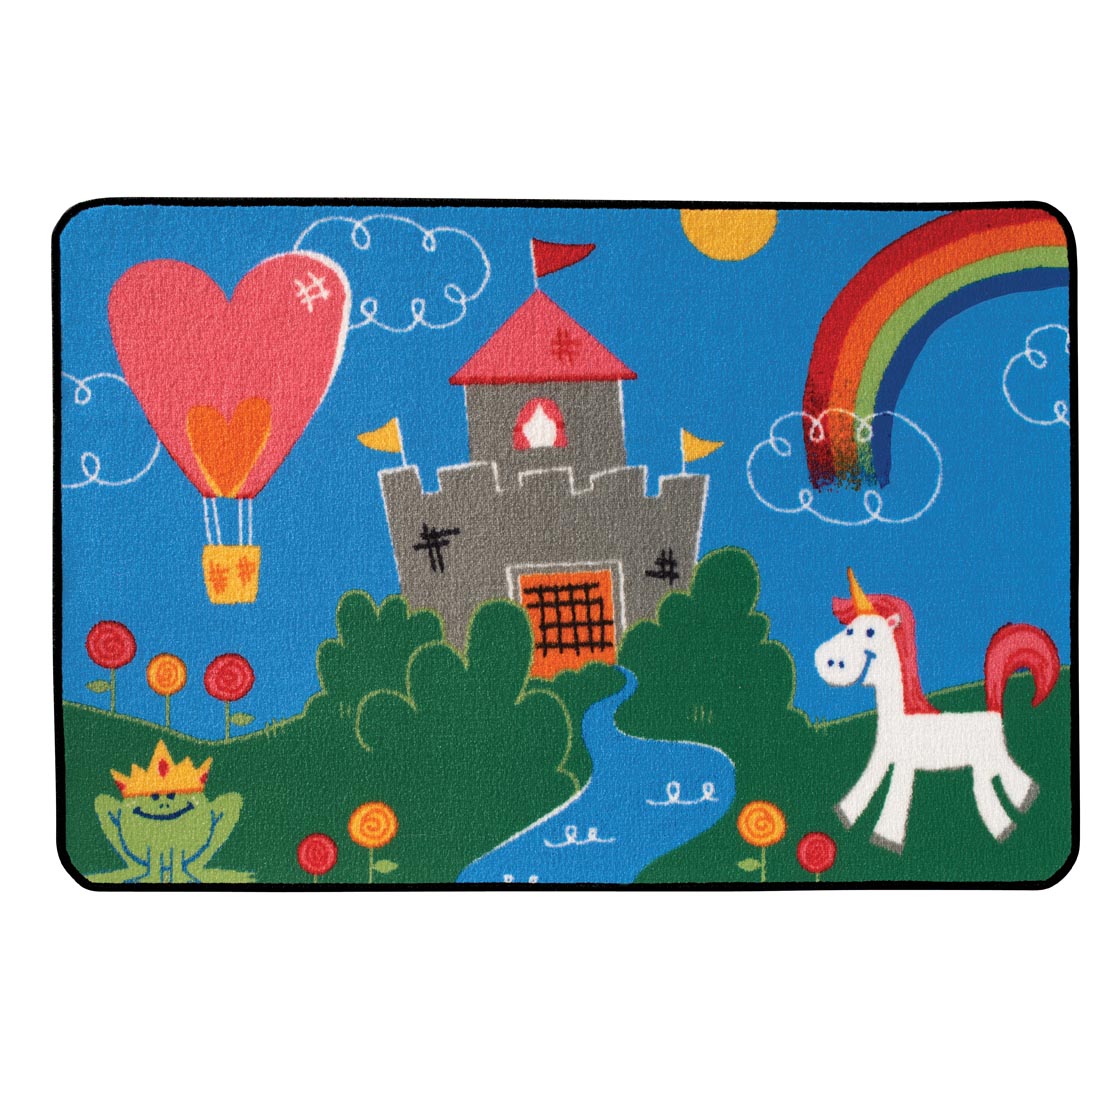 Fantasy Fun Kids Value Rug by Carpets For Kids